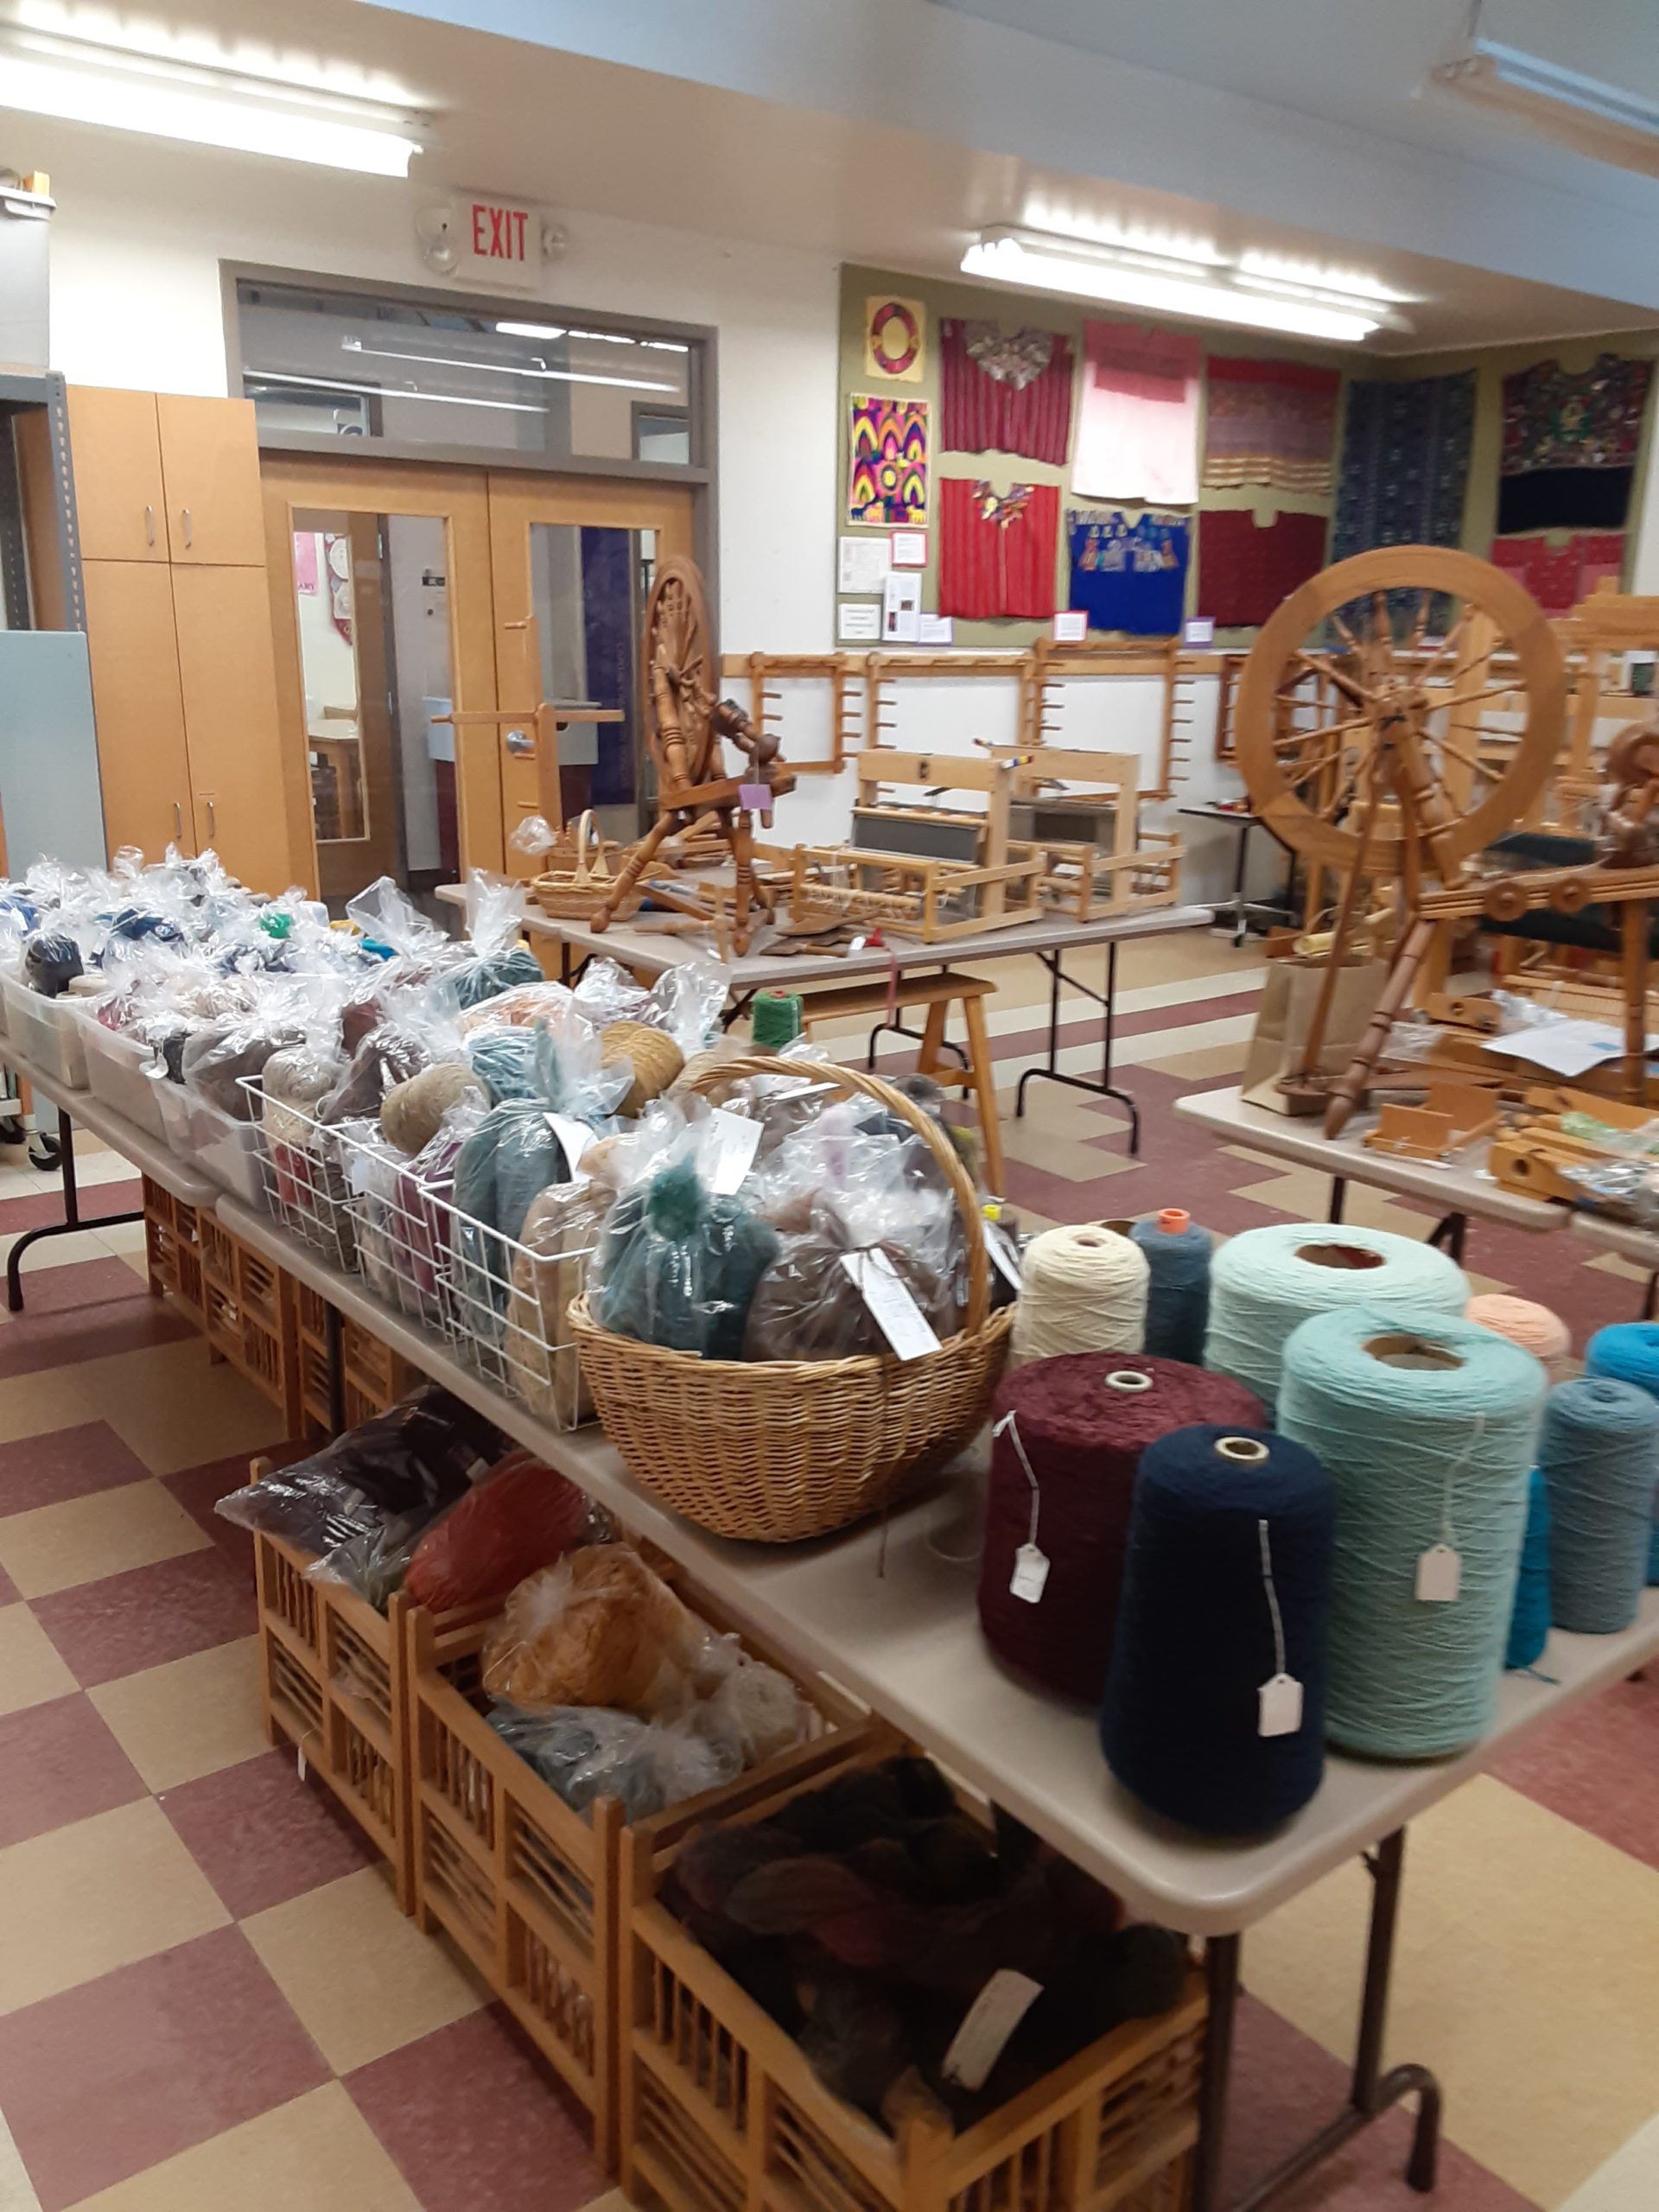 Donated items sale! 15-25% off